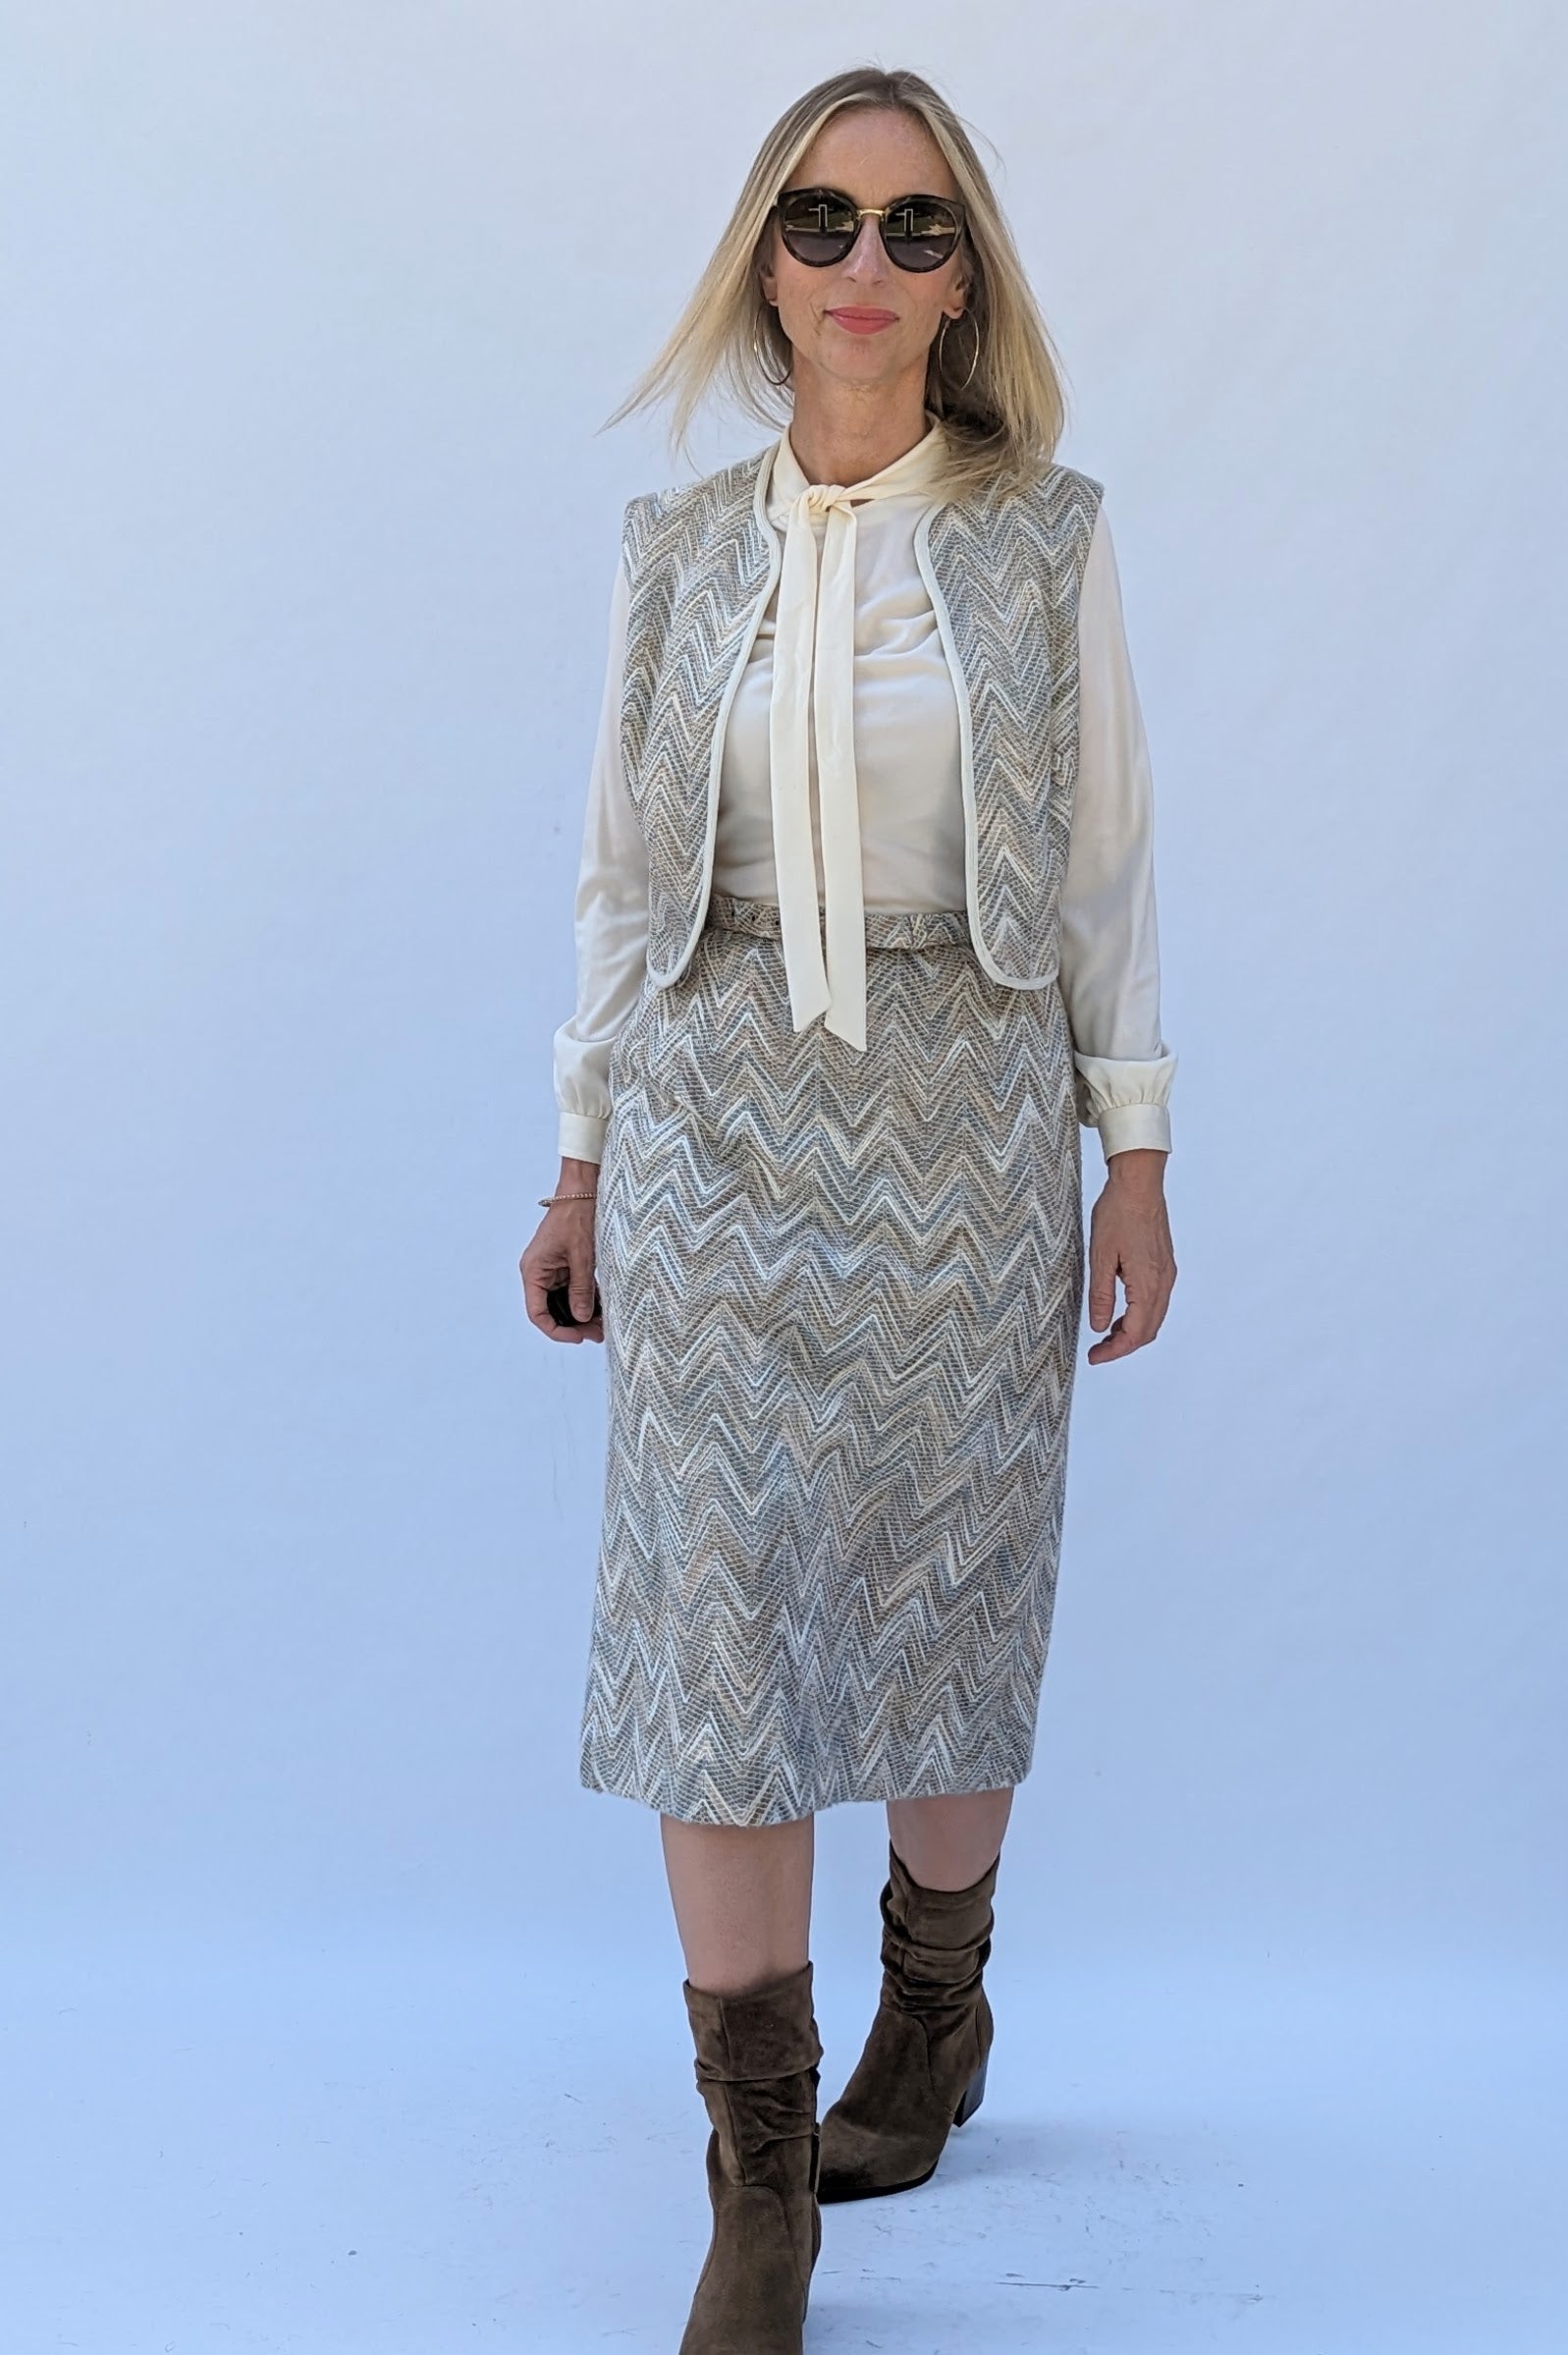 1970s cream top and woven skirt dress with waistcoat and tie blouse